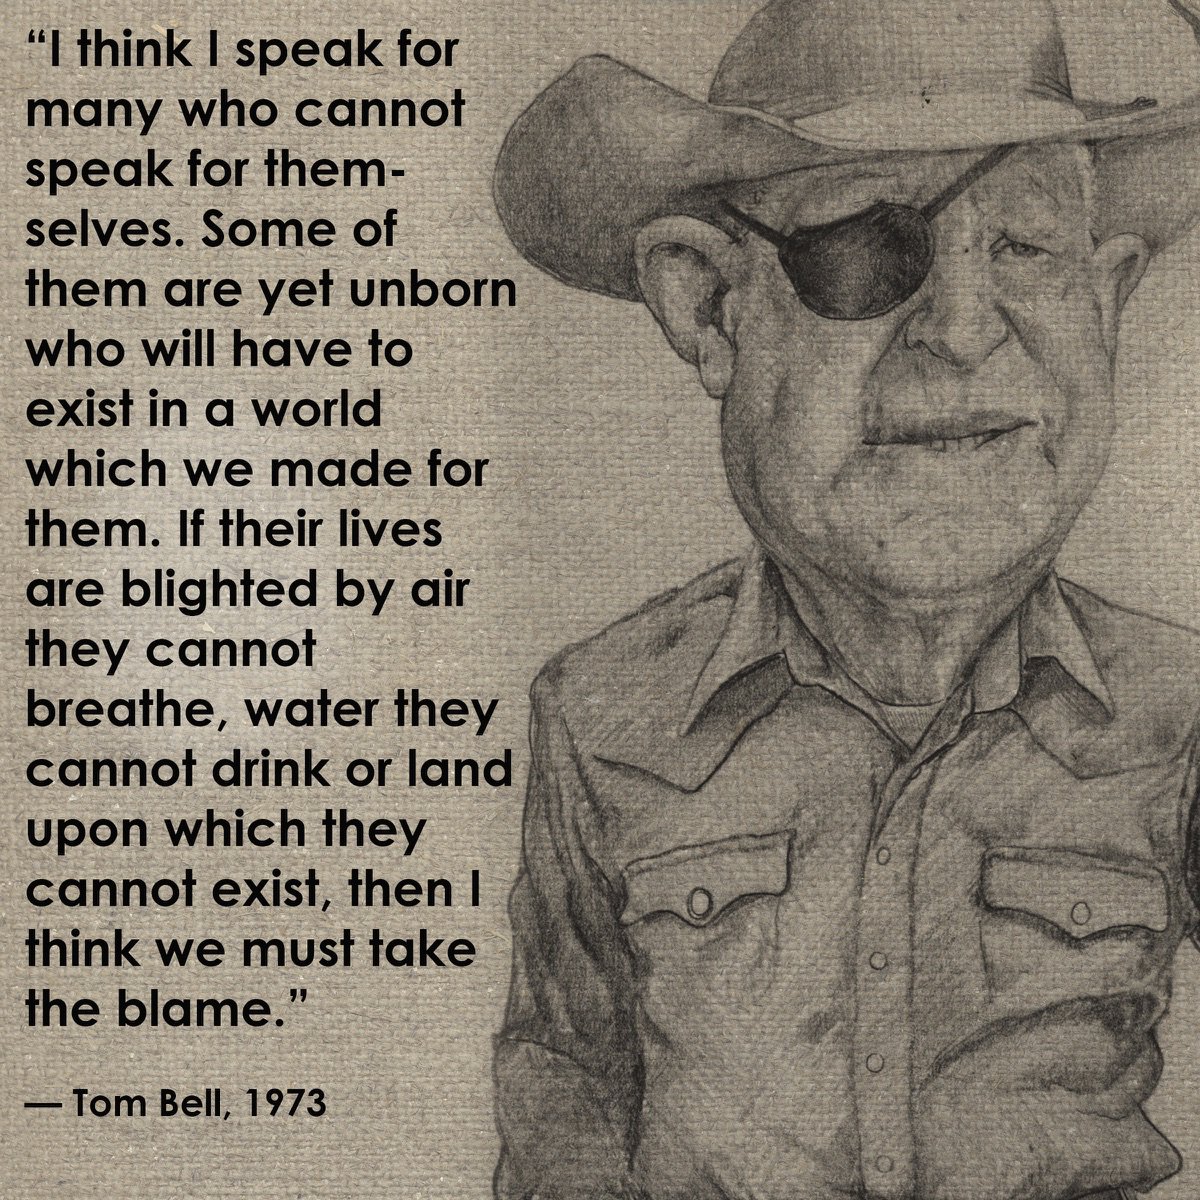 Today would have been Outdoor Council founder Tom Bell’s 94th birthday. We're proud to continue his work, and ask you to join us in Tom’s memory. Illustration by #ZacharyPullen | #ConservationLeaders #TomBell #KeepItPublicWyo #Conservation #PublicLands #EarthDay2018 #WildWyoming